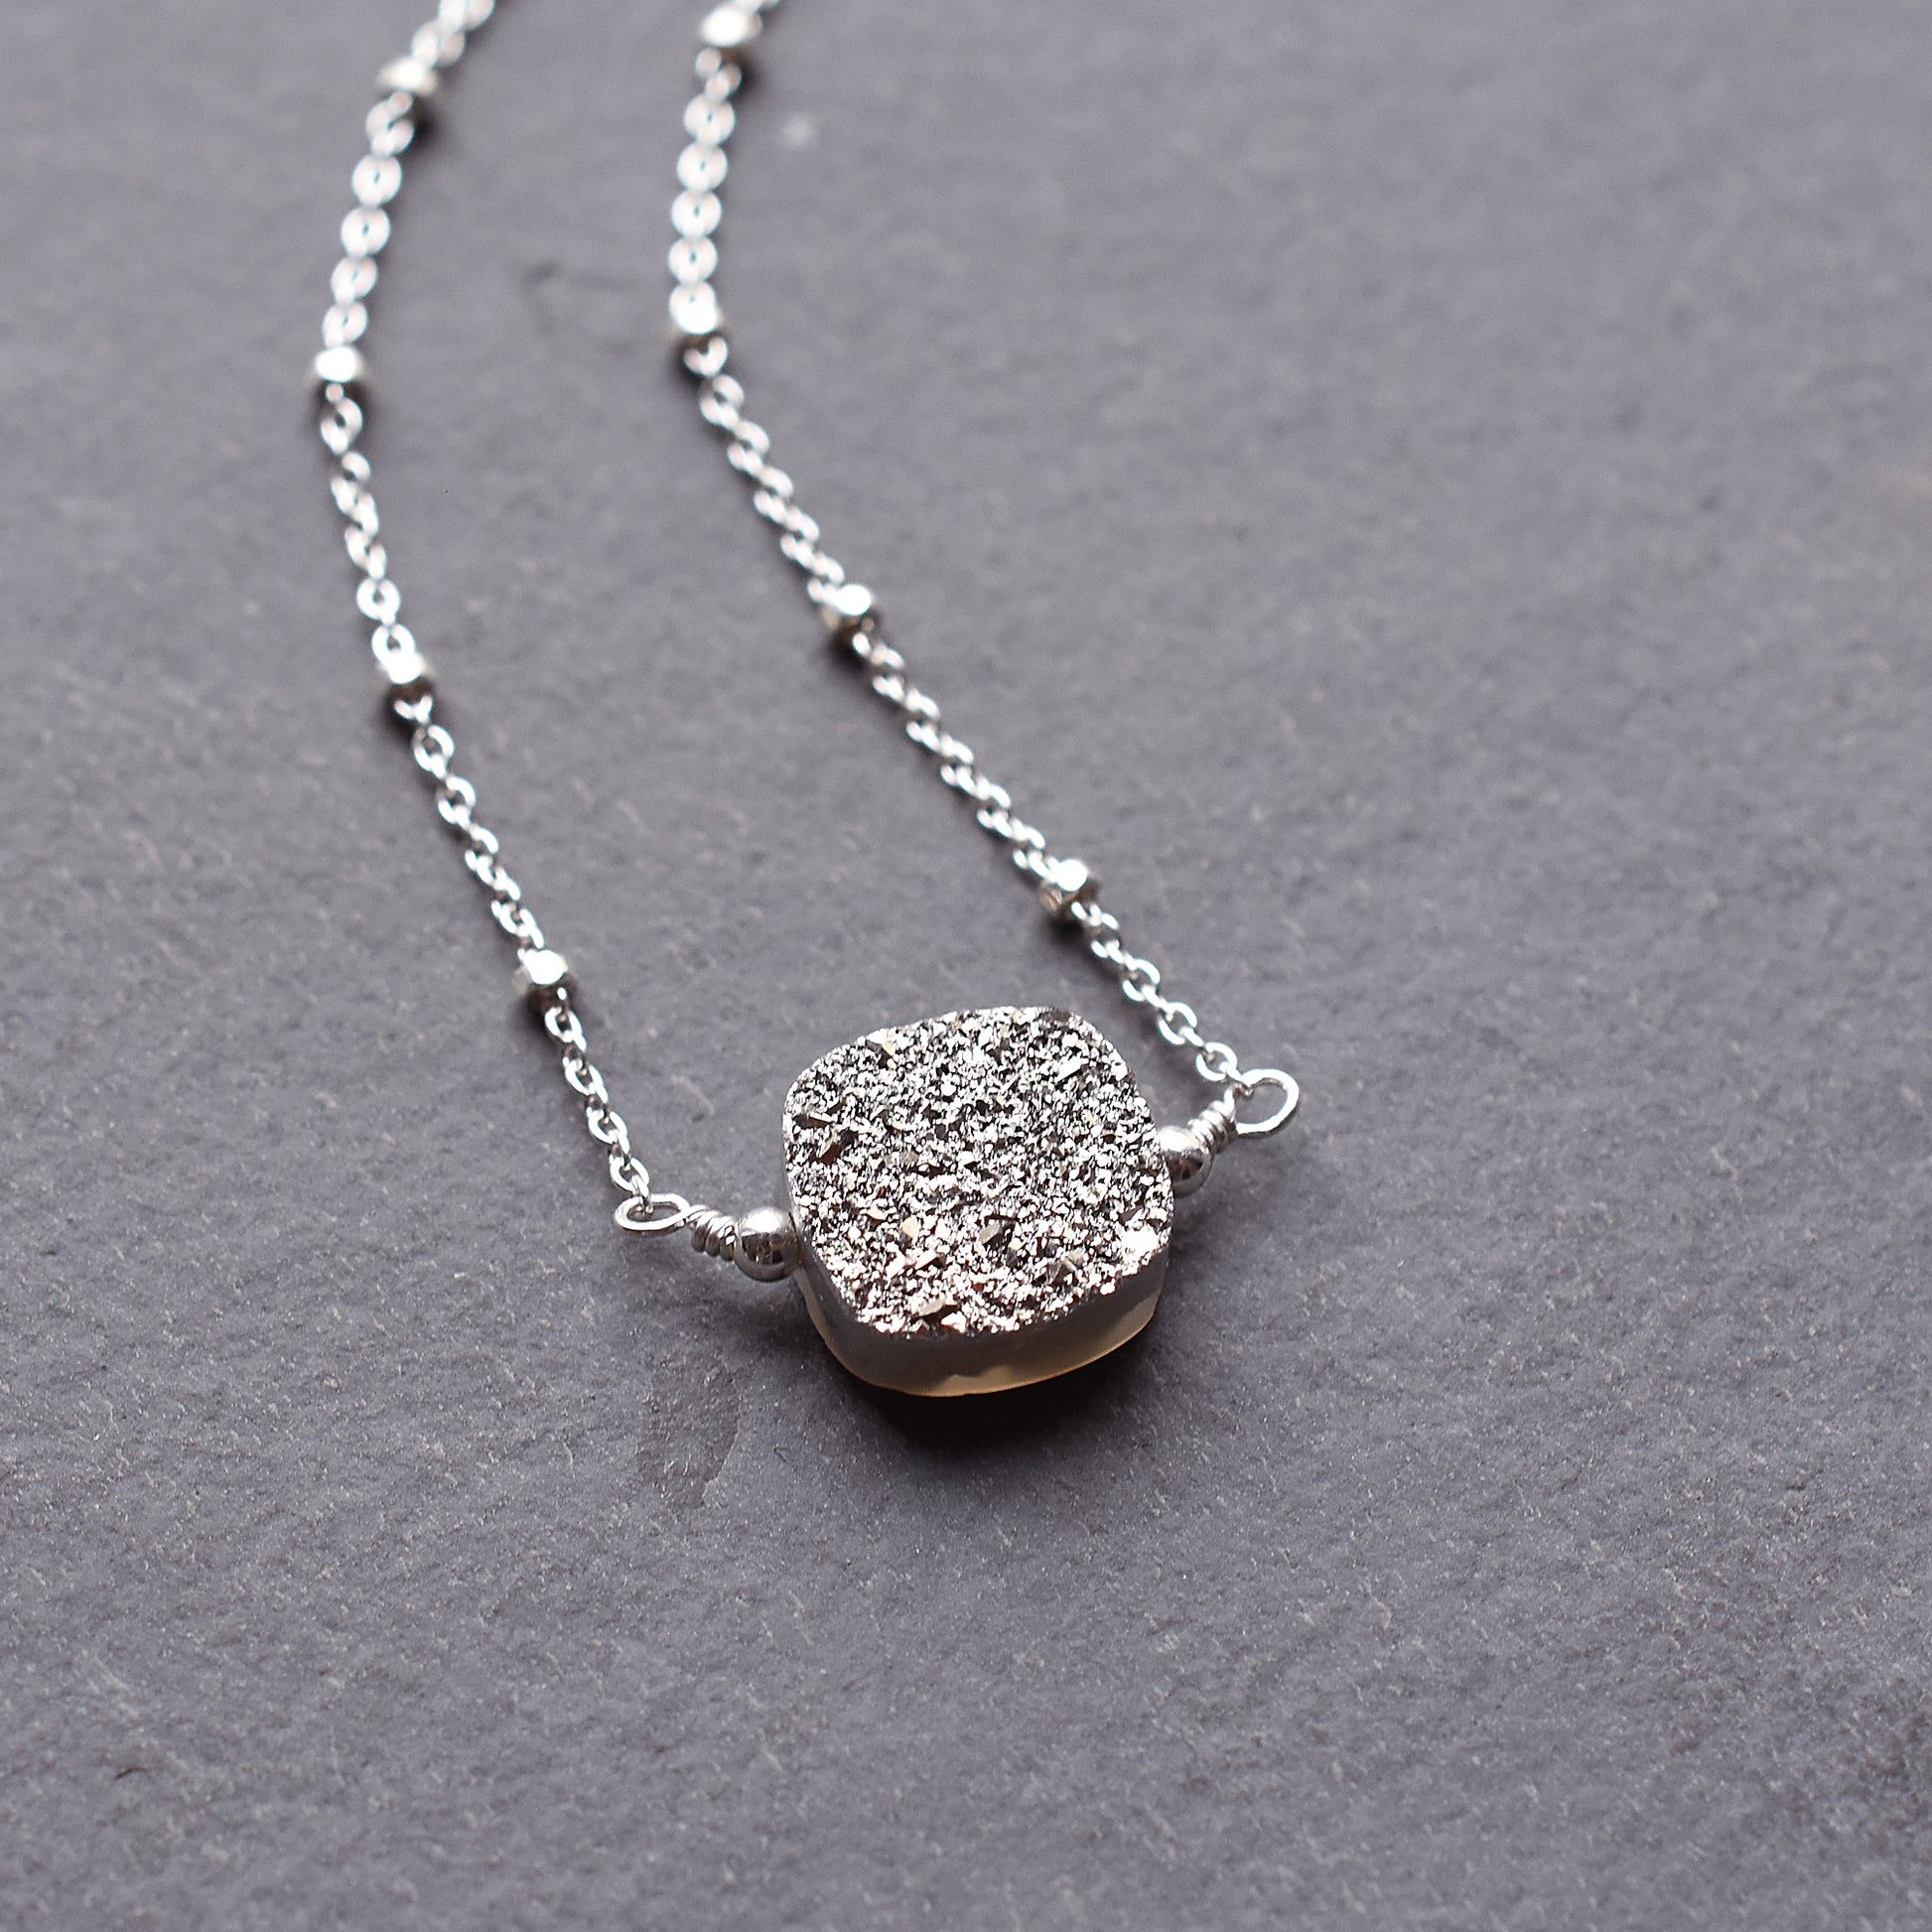 Silver Square Druzy Geode Necklace 